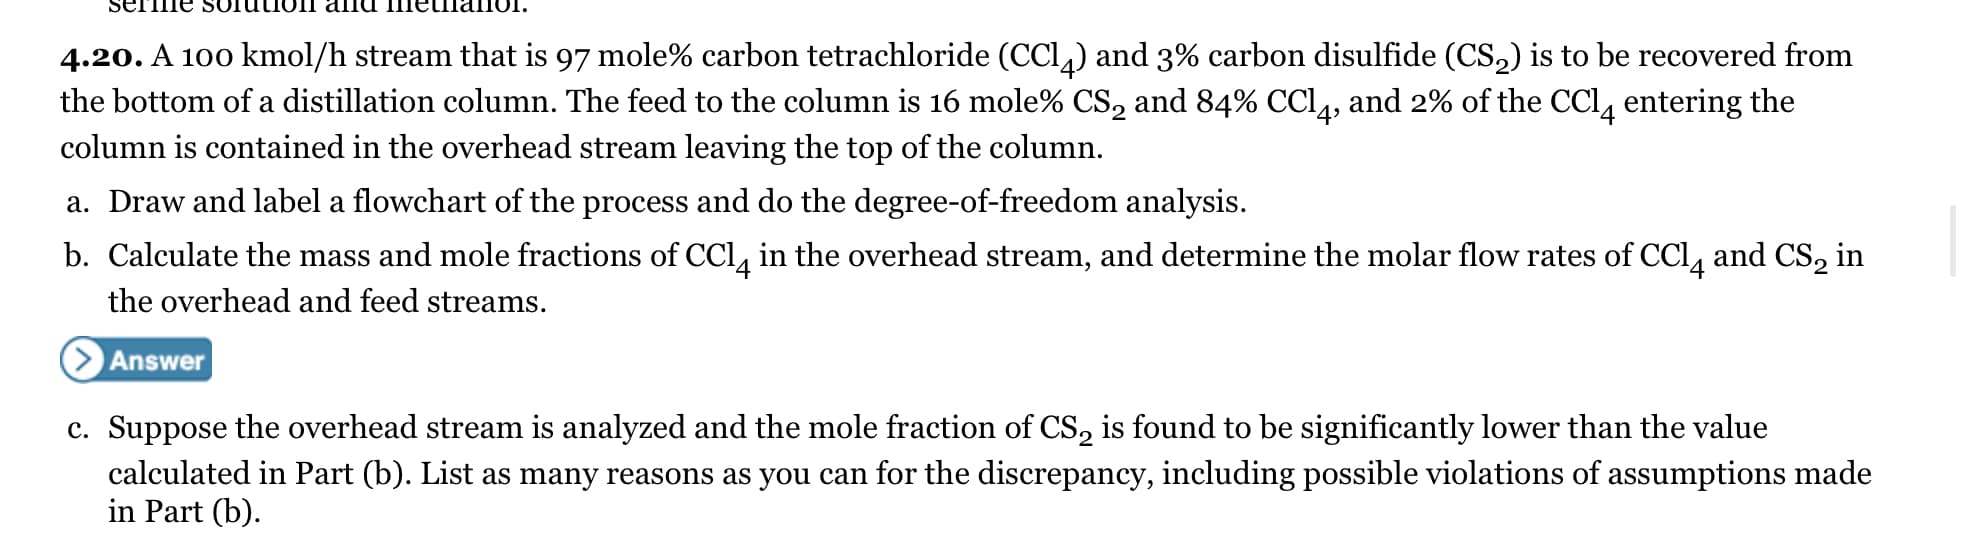 SETTie Sоruuoг aпа тetnaпог.
4.20. A 100 kmol/h stream that is 97 mole% carbon tetrachloride (CCl) and 3% carbon disulfide (CS,) is to be recovered from
the bottom of a distillation column. The feed to the column is 16 mole% CS, and 84% CCL, and 2% of the CCl, entering the
column is contained in the overhead stream leaving the top of the column.
a. Draw and label a flowchart of the process and do the degree-of-freedom analysis.
b. Calculate the mass and mole fractions of CCl, in the overhead stream, and determine the molar flow rates of CCl, and CS, in
the overhead and feed streams.
Answer
c. Suppose the overhead stream is analyzed and the mole fraction of CS, is found to be significantly lower than the value
calculated in Part (b). List as many reasons as you can for the discrepancy, including possible violations of assumptions made
in Part (b).
